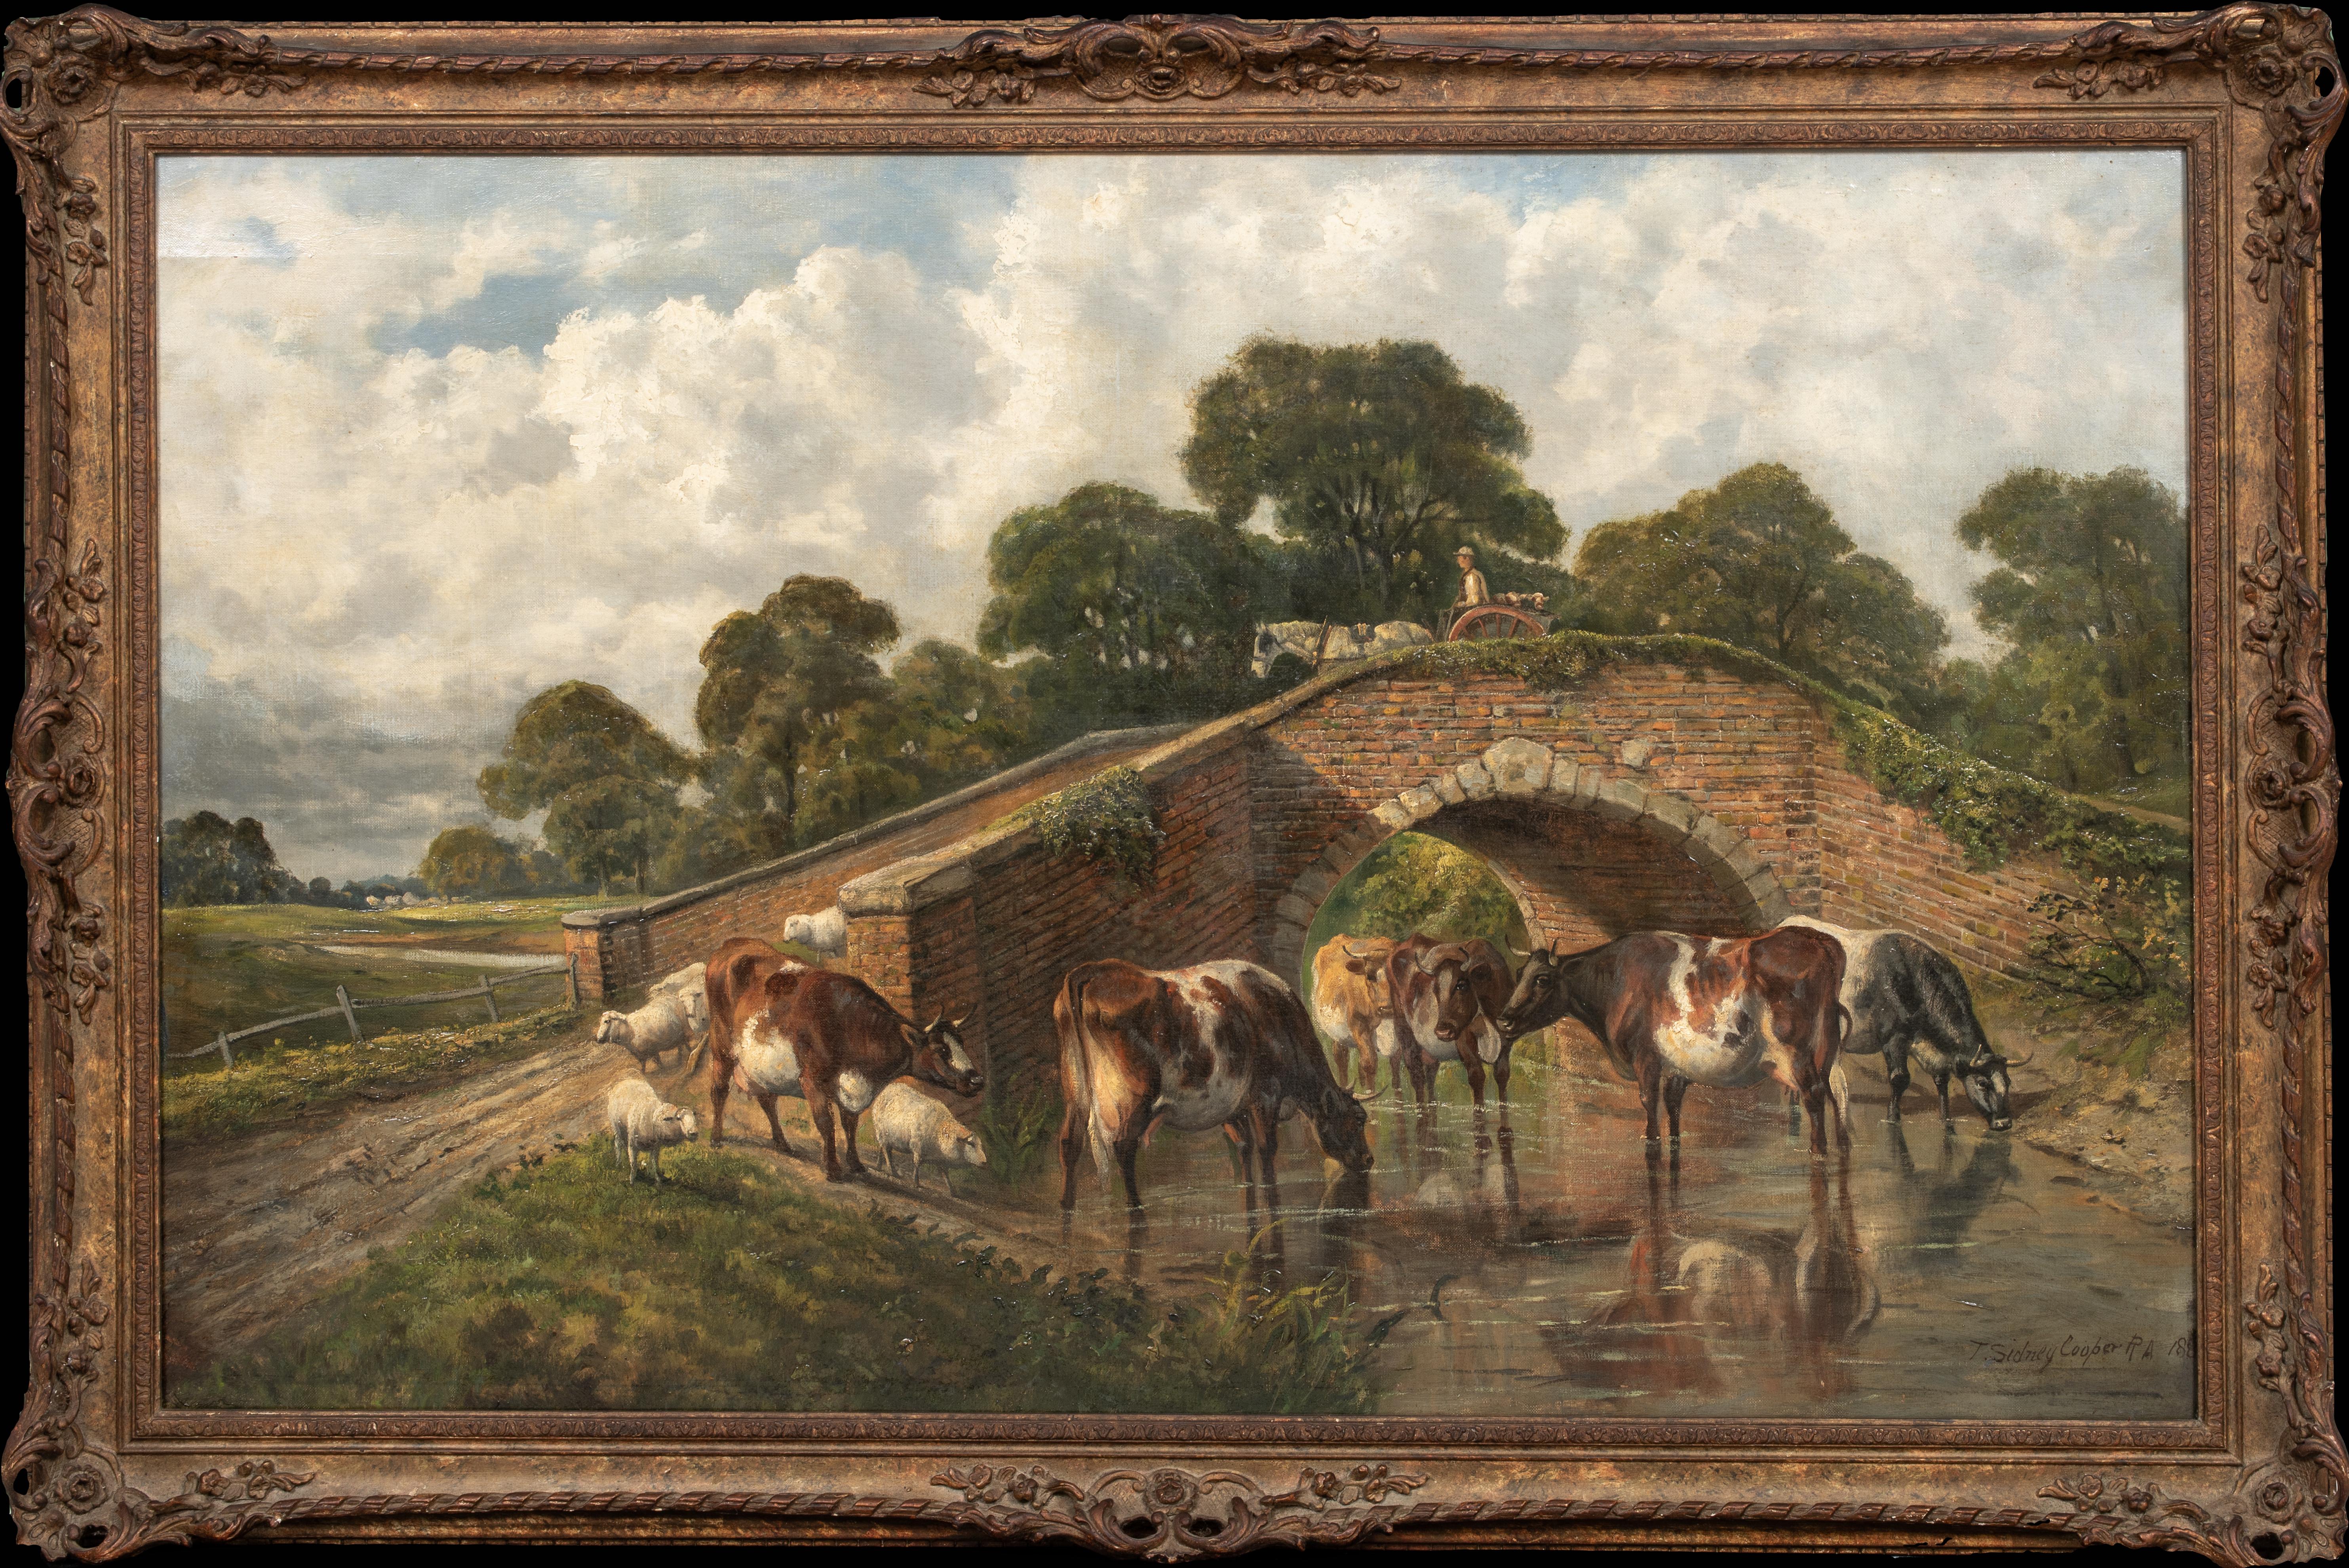 Thomas Sidney Cooper Animal Painting - Cattle Watering At The Stream, 19th Century   by THOMAS SIDNEY COOPER (1803-1902